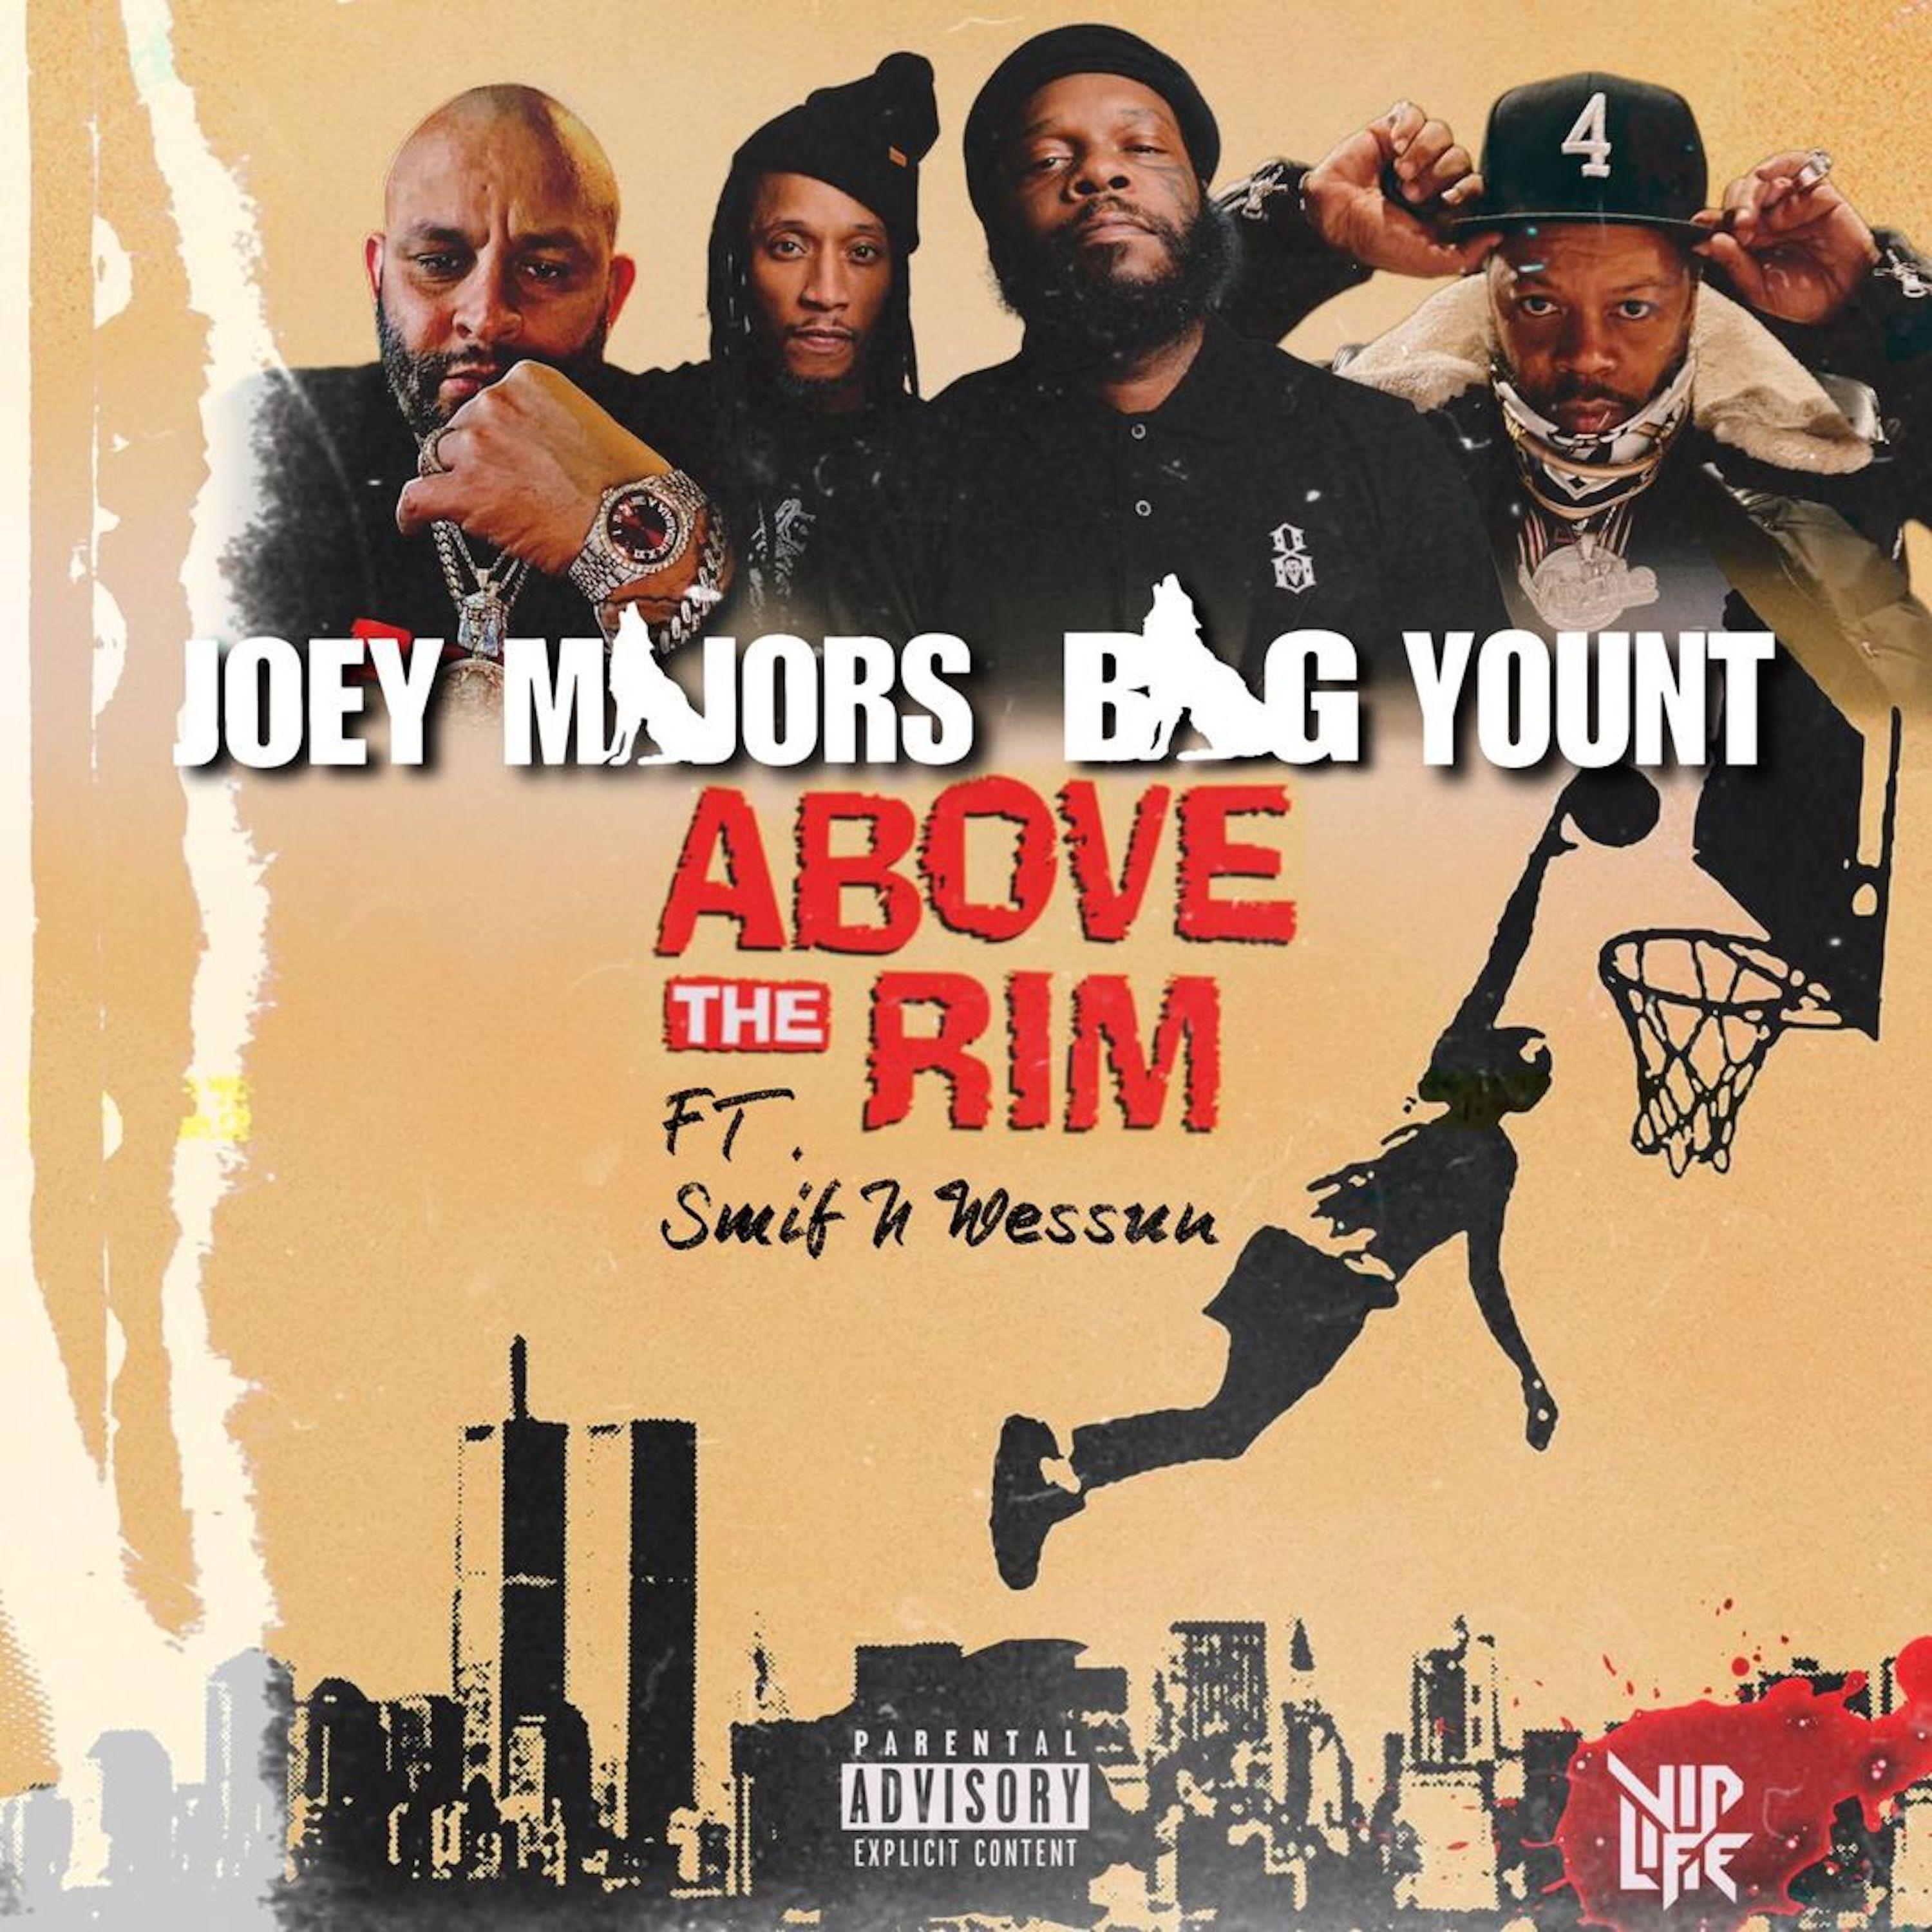 Joey Majors - Above The Rim (feat. Smif-N-Wessun) [Instrumental]